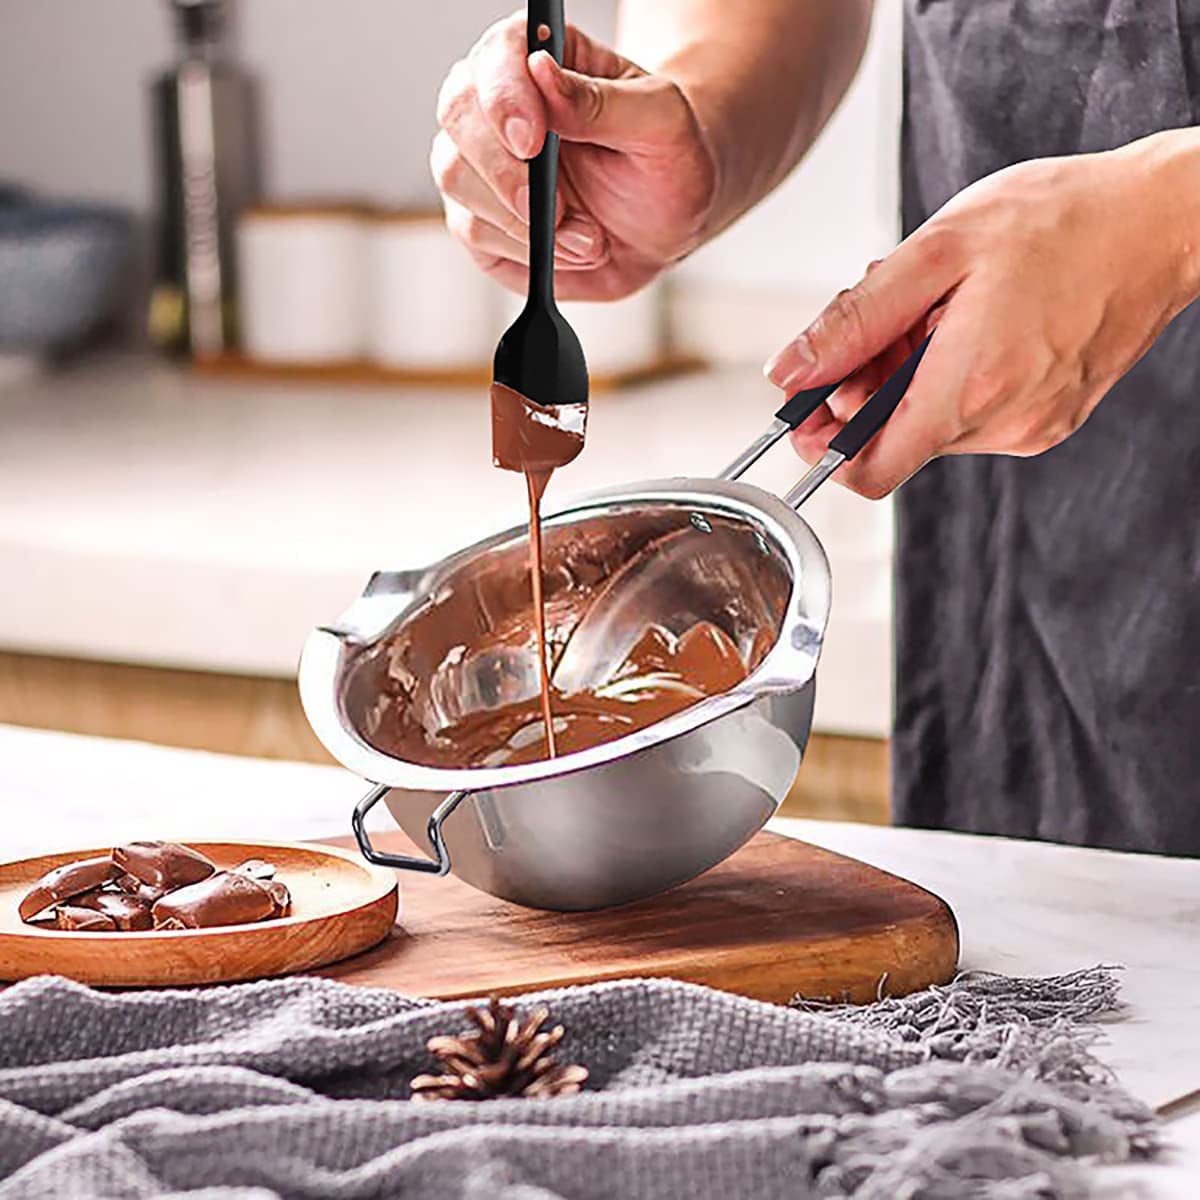 Chocolate Melting Pot - 1000ml Double Boiler with Heat Resistant Handle, Stainless Steel Double Boiler Pot Set, Double Boilers for Stove Top Can